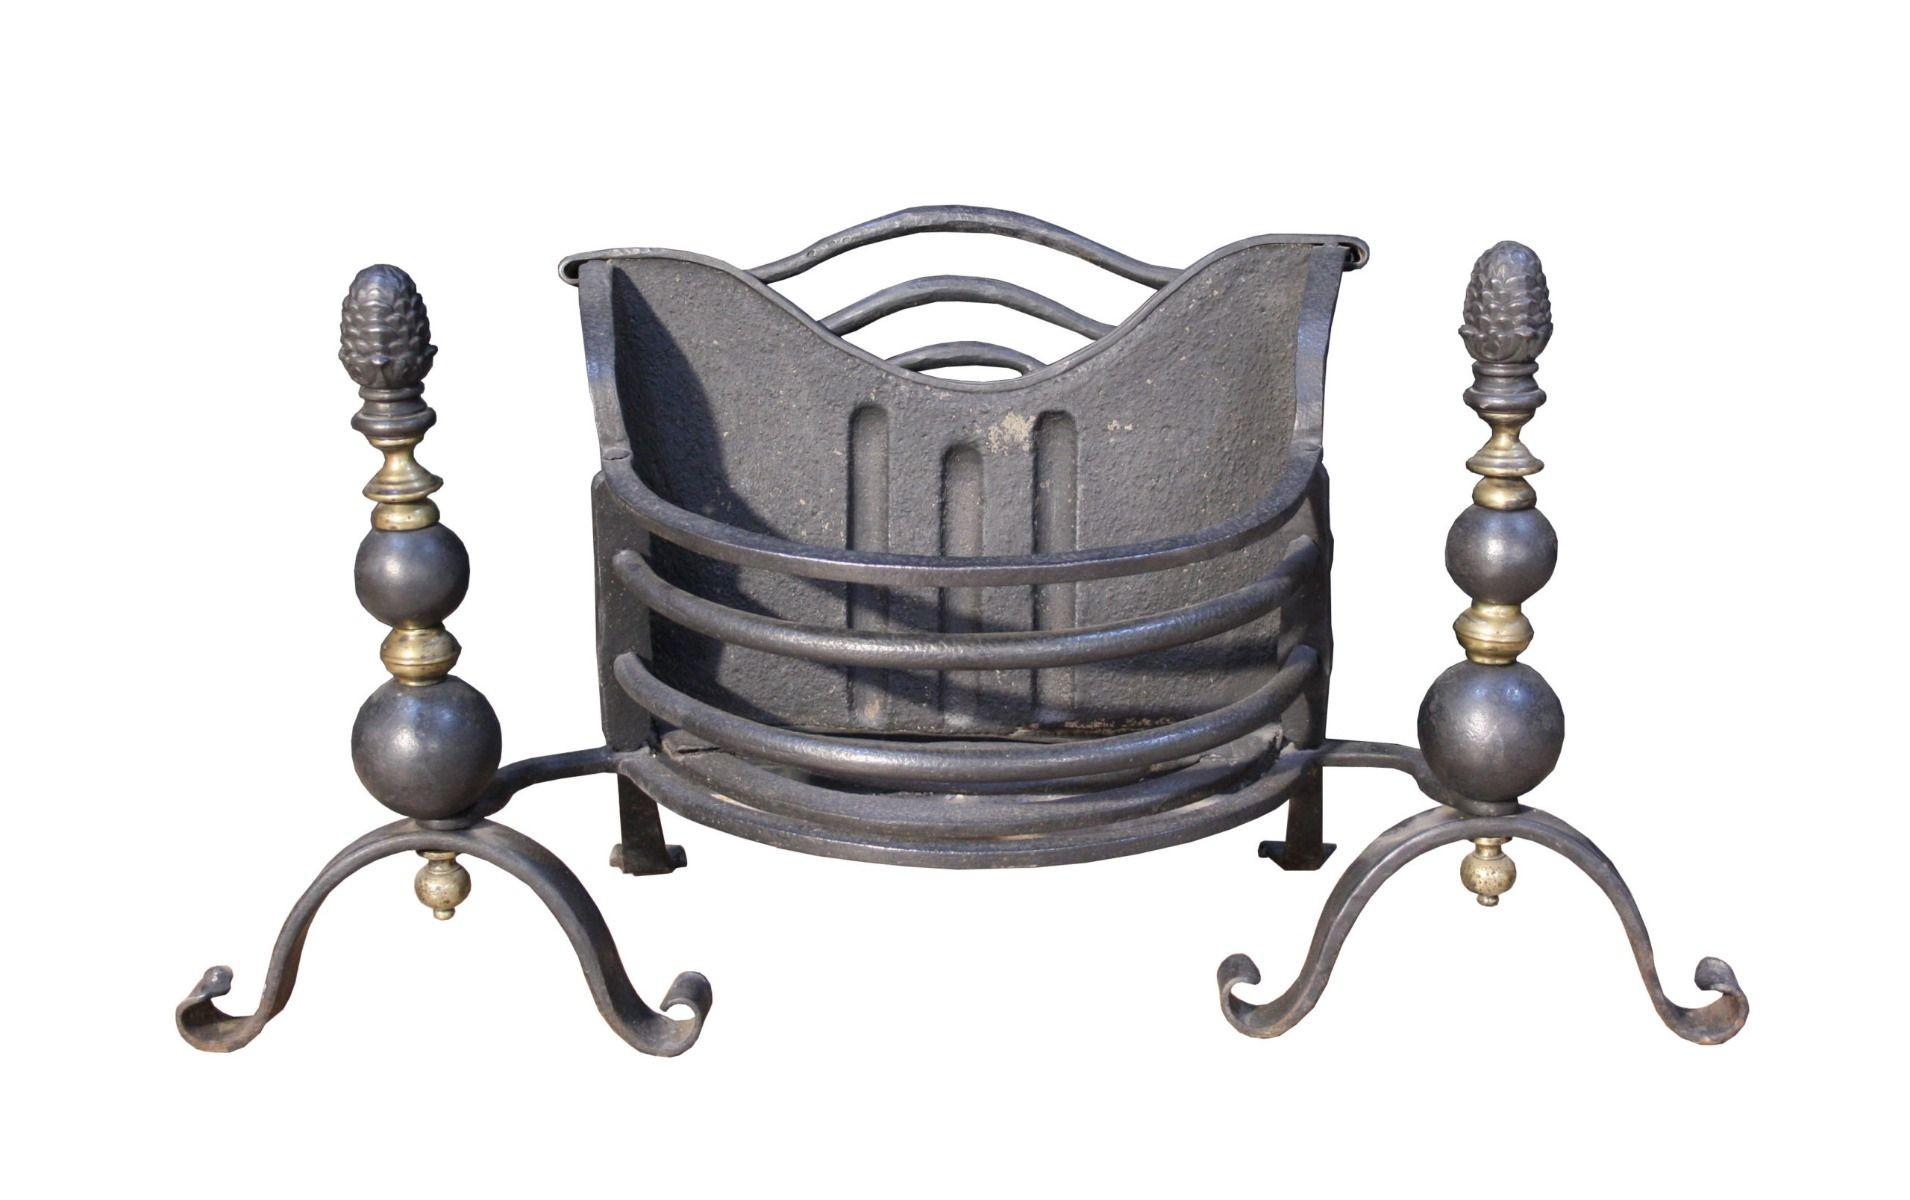 An antique Victorian wrought iron fire grate. Incorporating English brass, wrought and cast iron, this fire grate is finished in black graphite polish.
It showcases polished brass finials on tapered legs and a shaped cast iron back, with a shaped